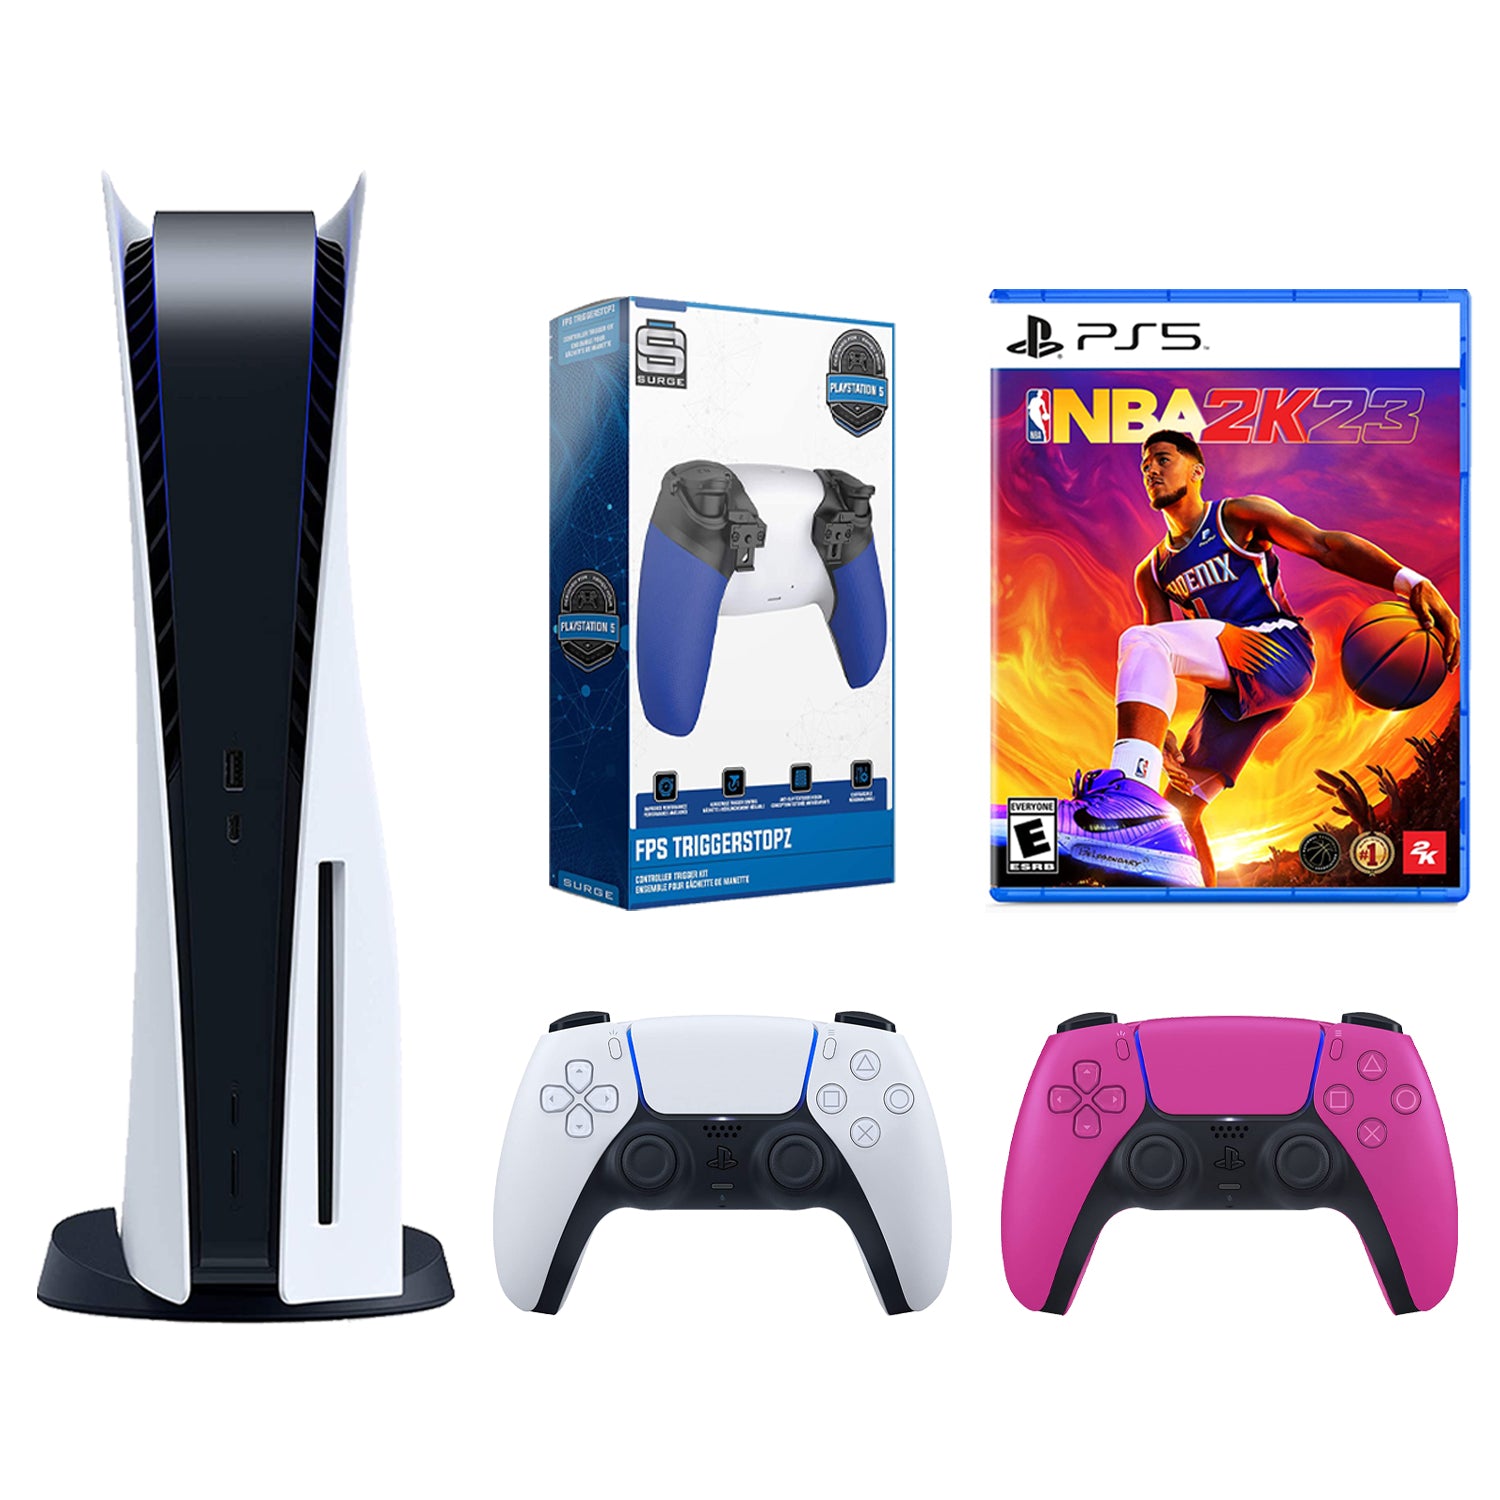 Sony Playstation 5 Disc with NBA 2K23, Extra Controller and Trigger Kit Bundle - Nova Pink - Pro-Distributing